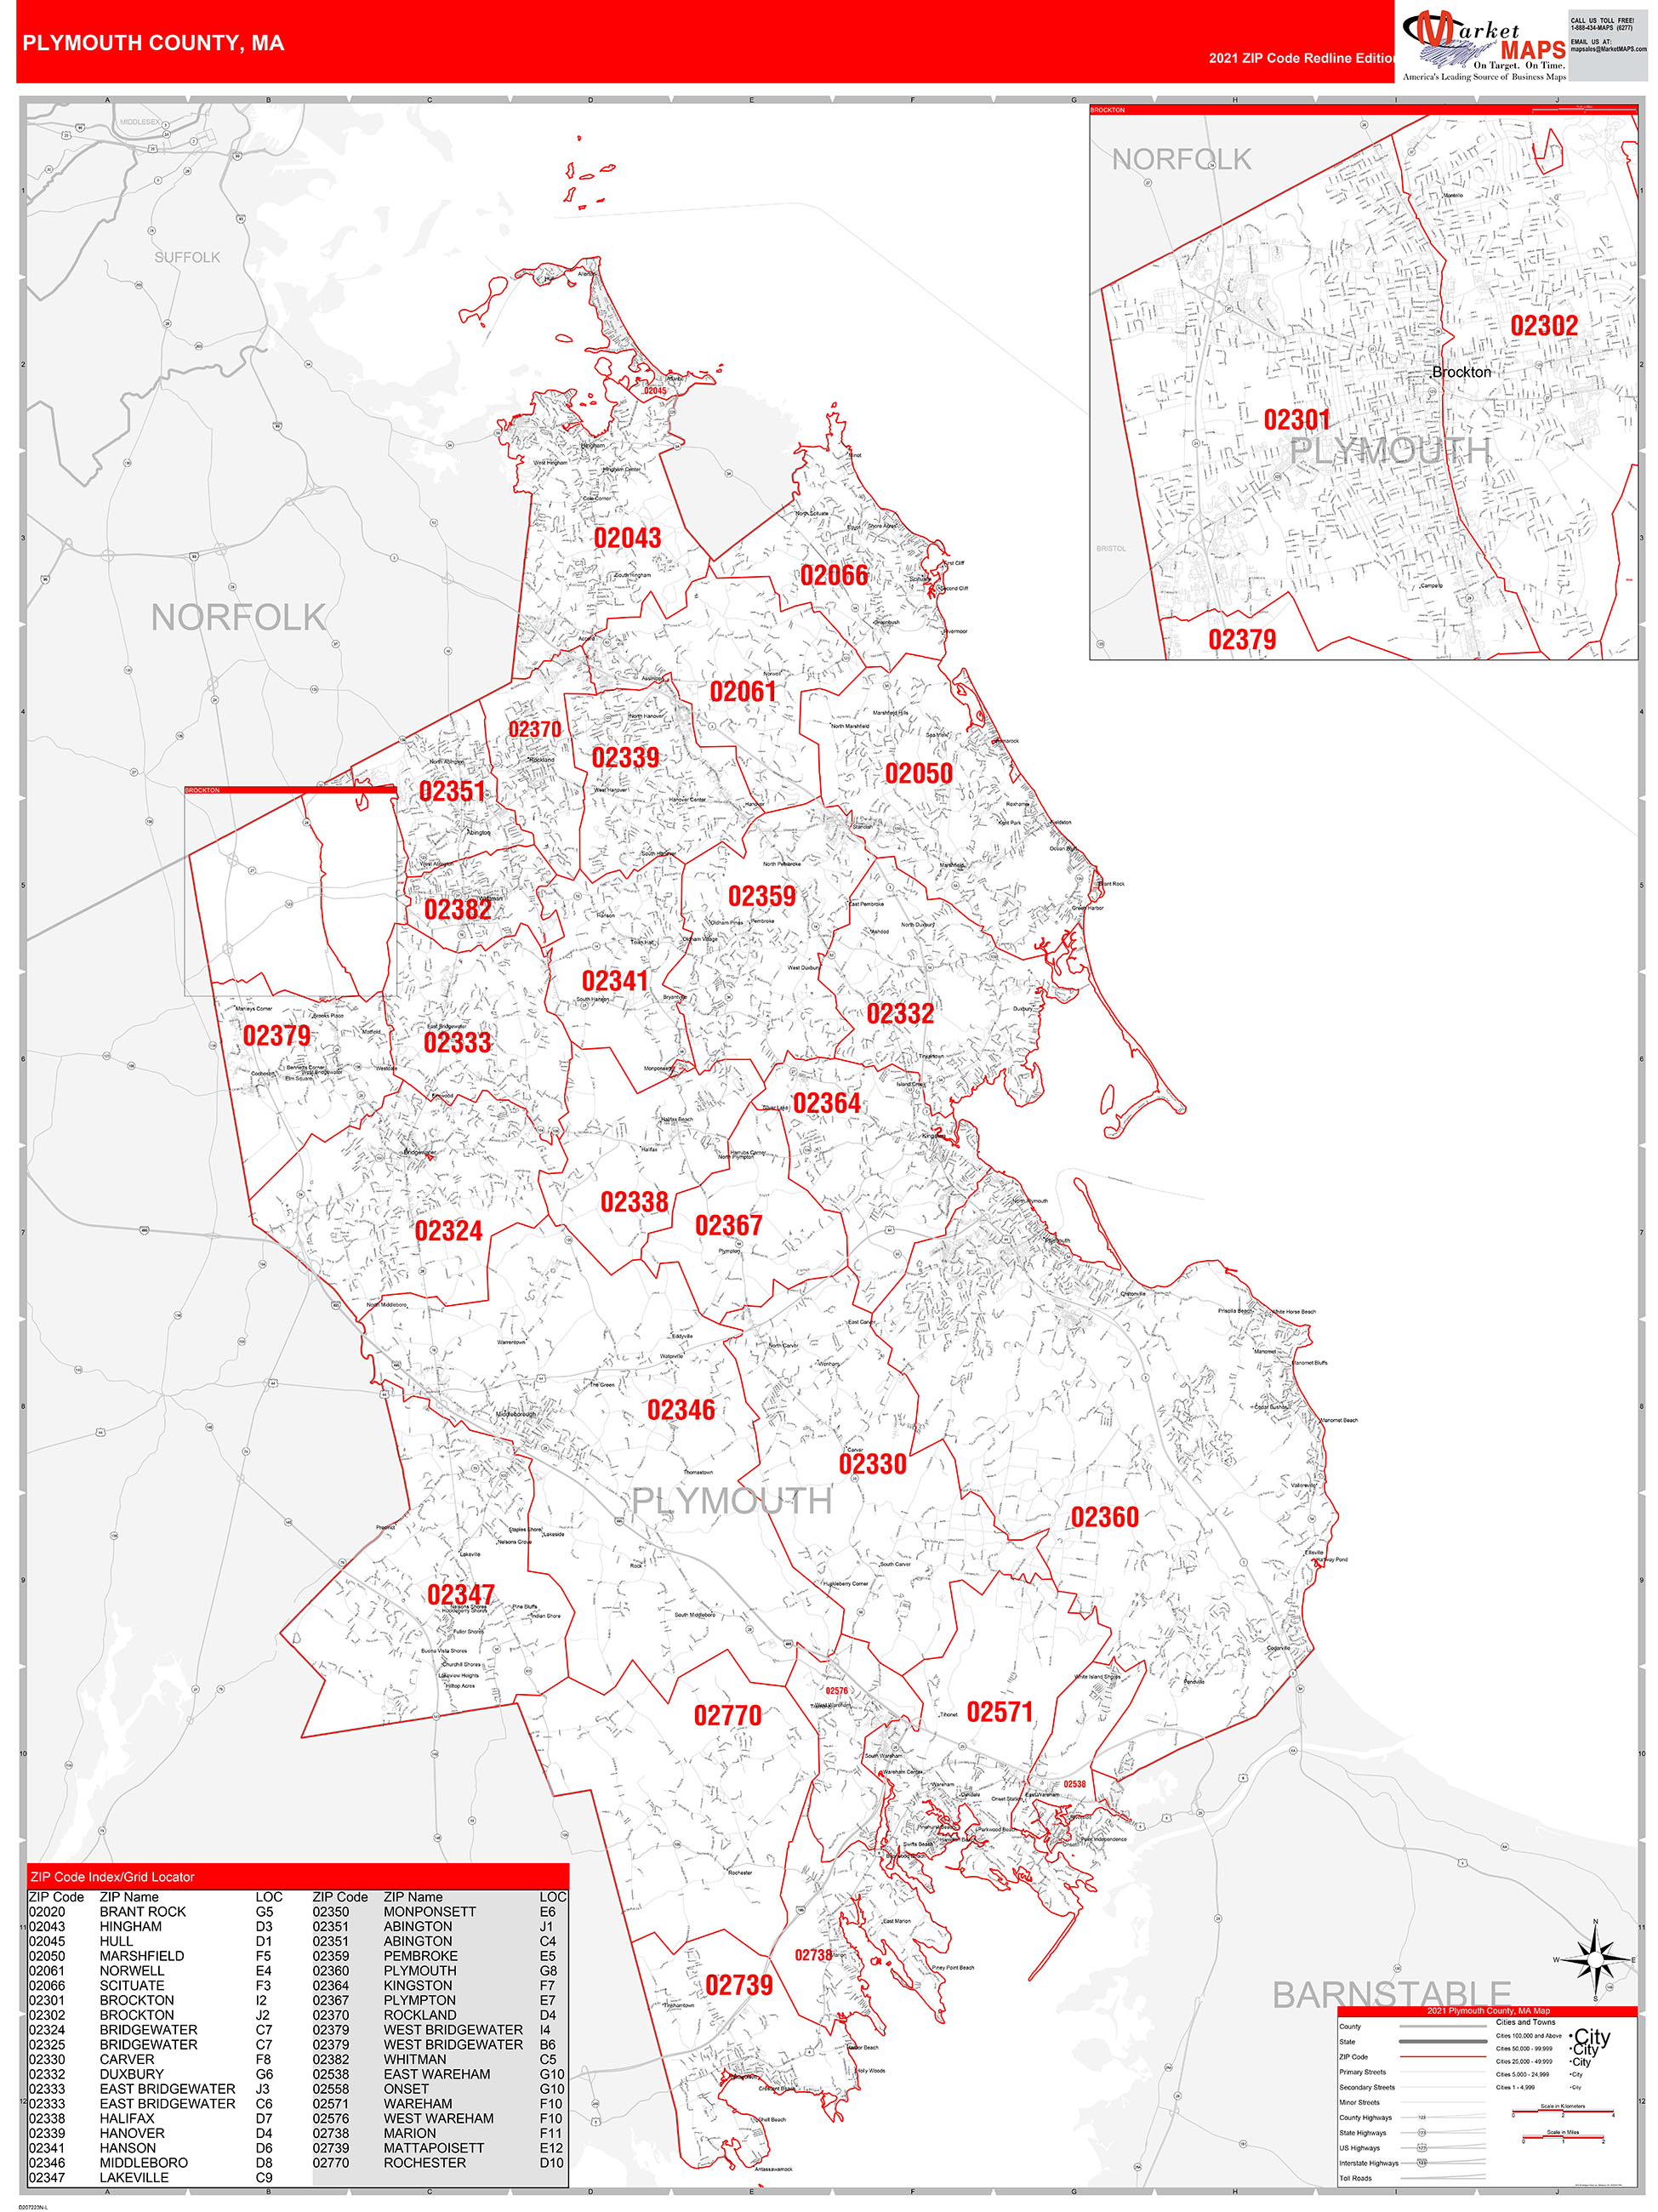 Plymouth County, MA Zip Code Wall Map Red Line Style by MarketMAPS ...